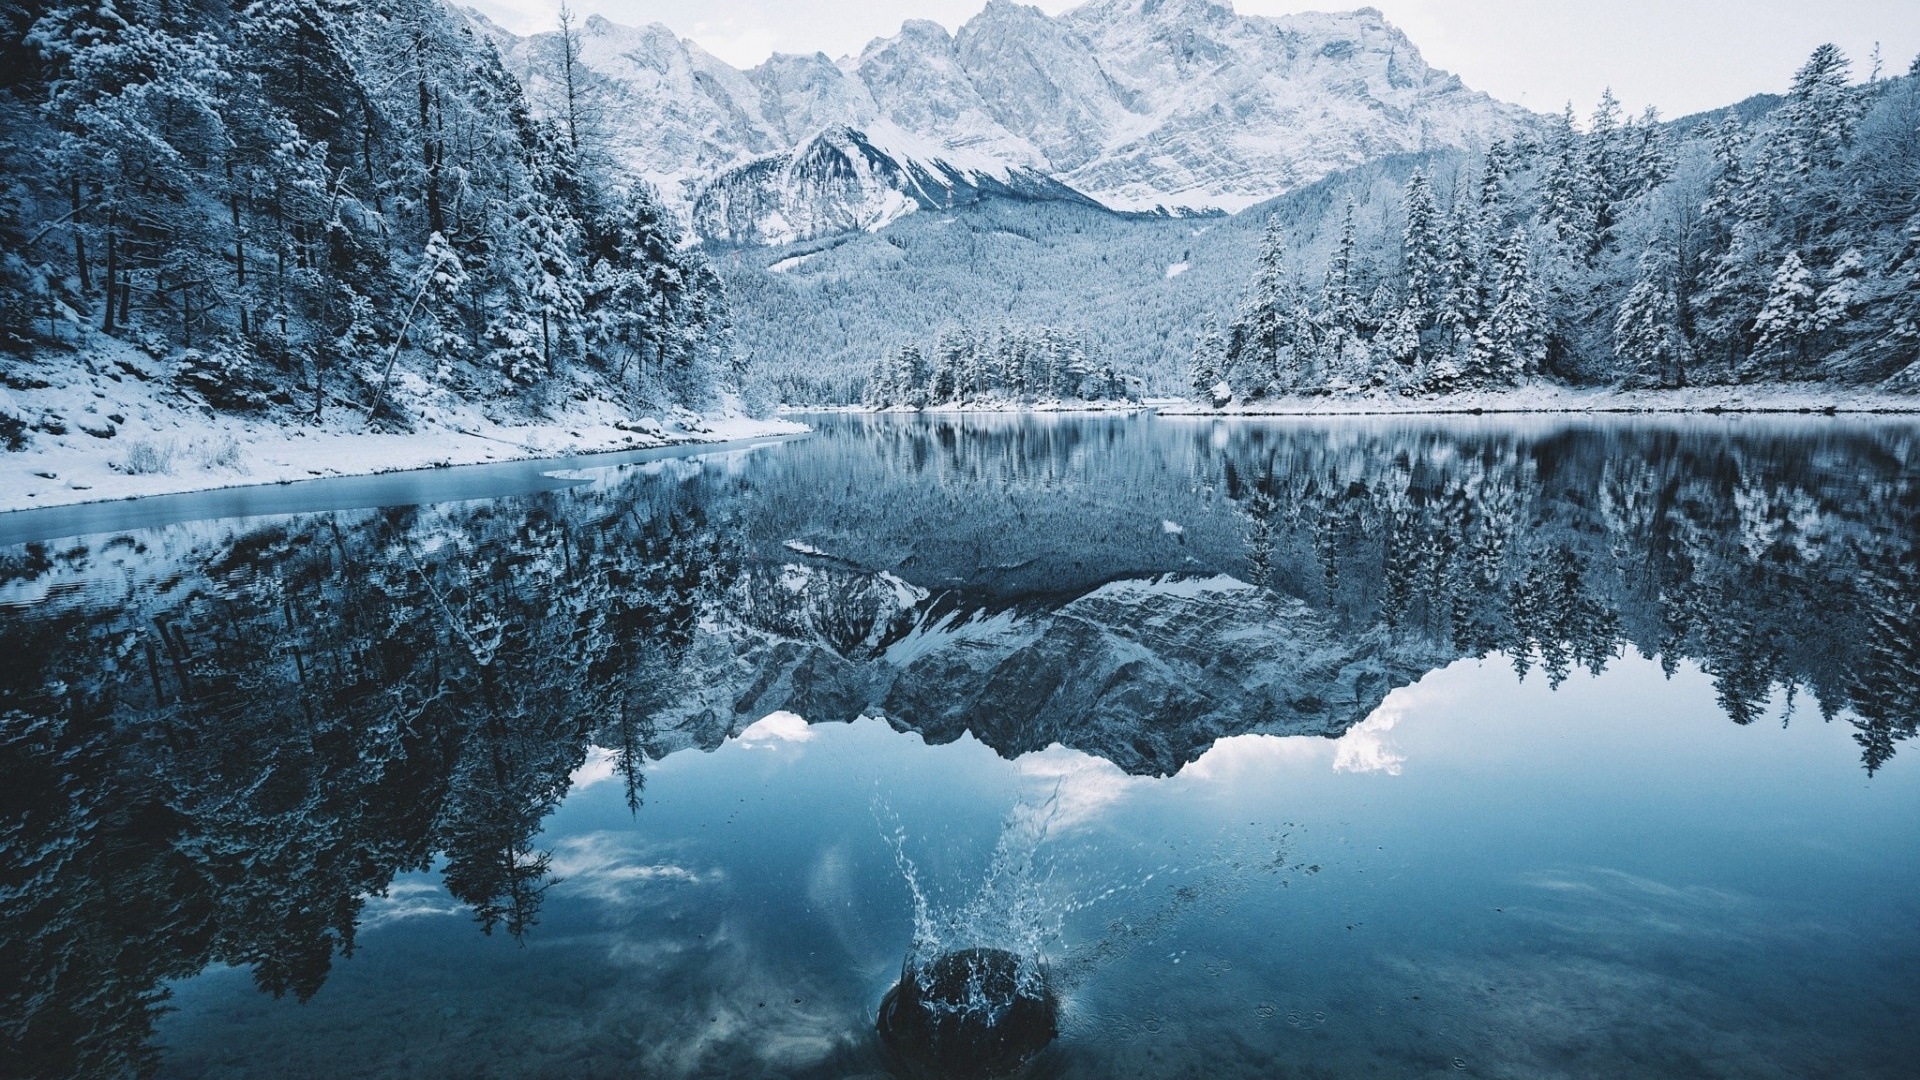 , , , , , , , , , trees, reflection, lake, mountains, rocks, snow, nature, forest, winter